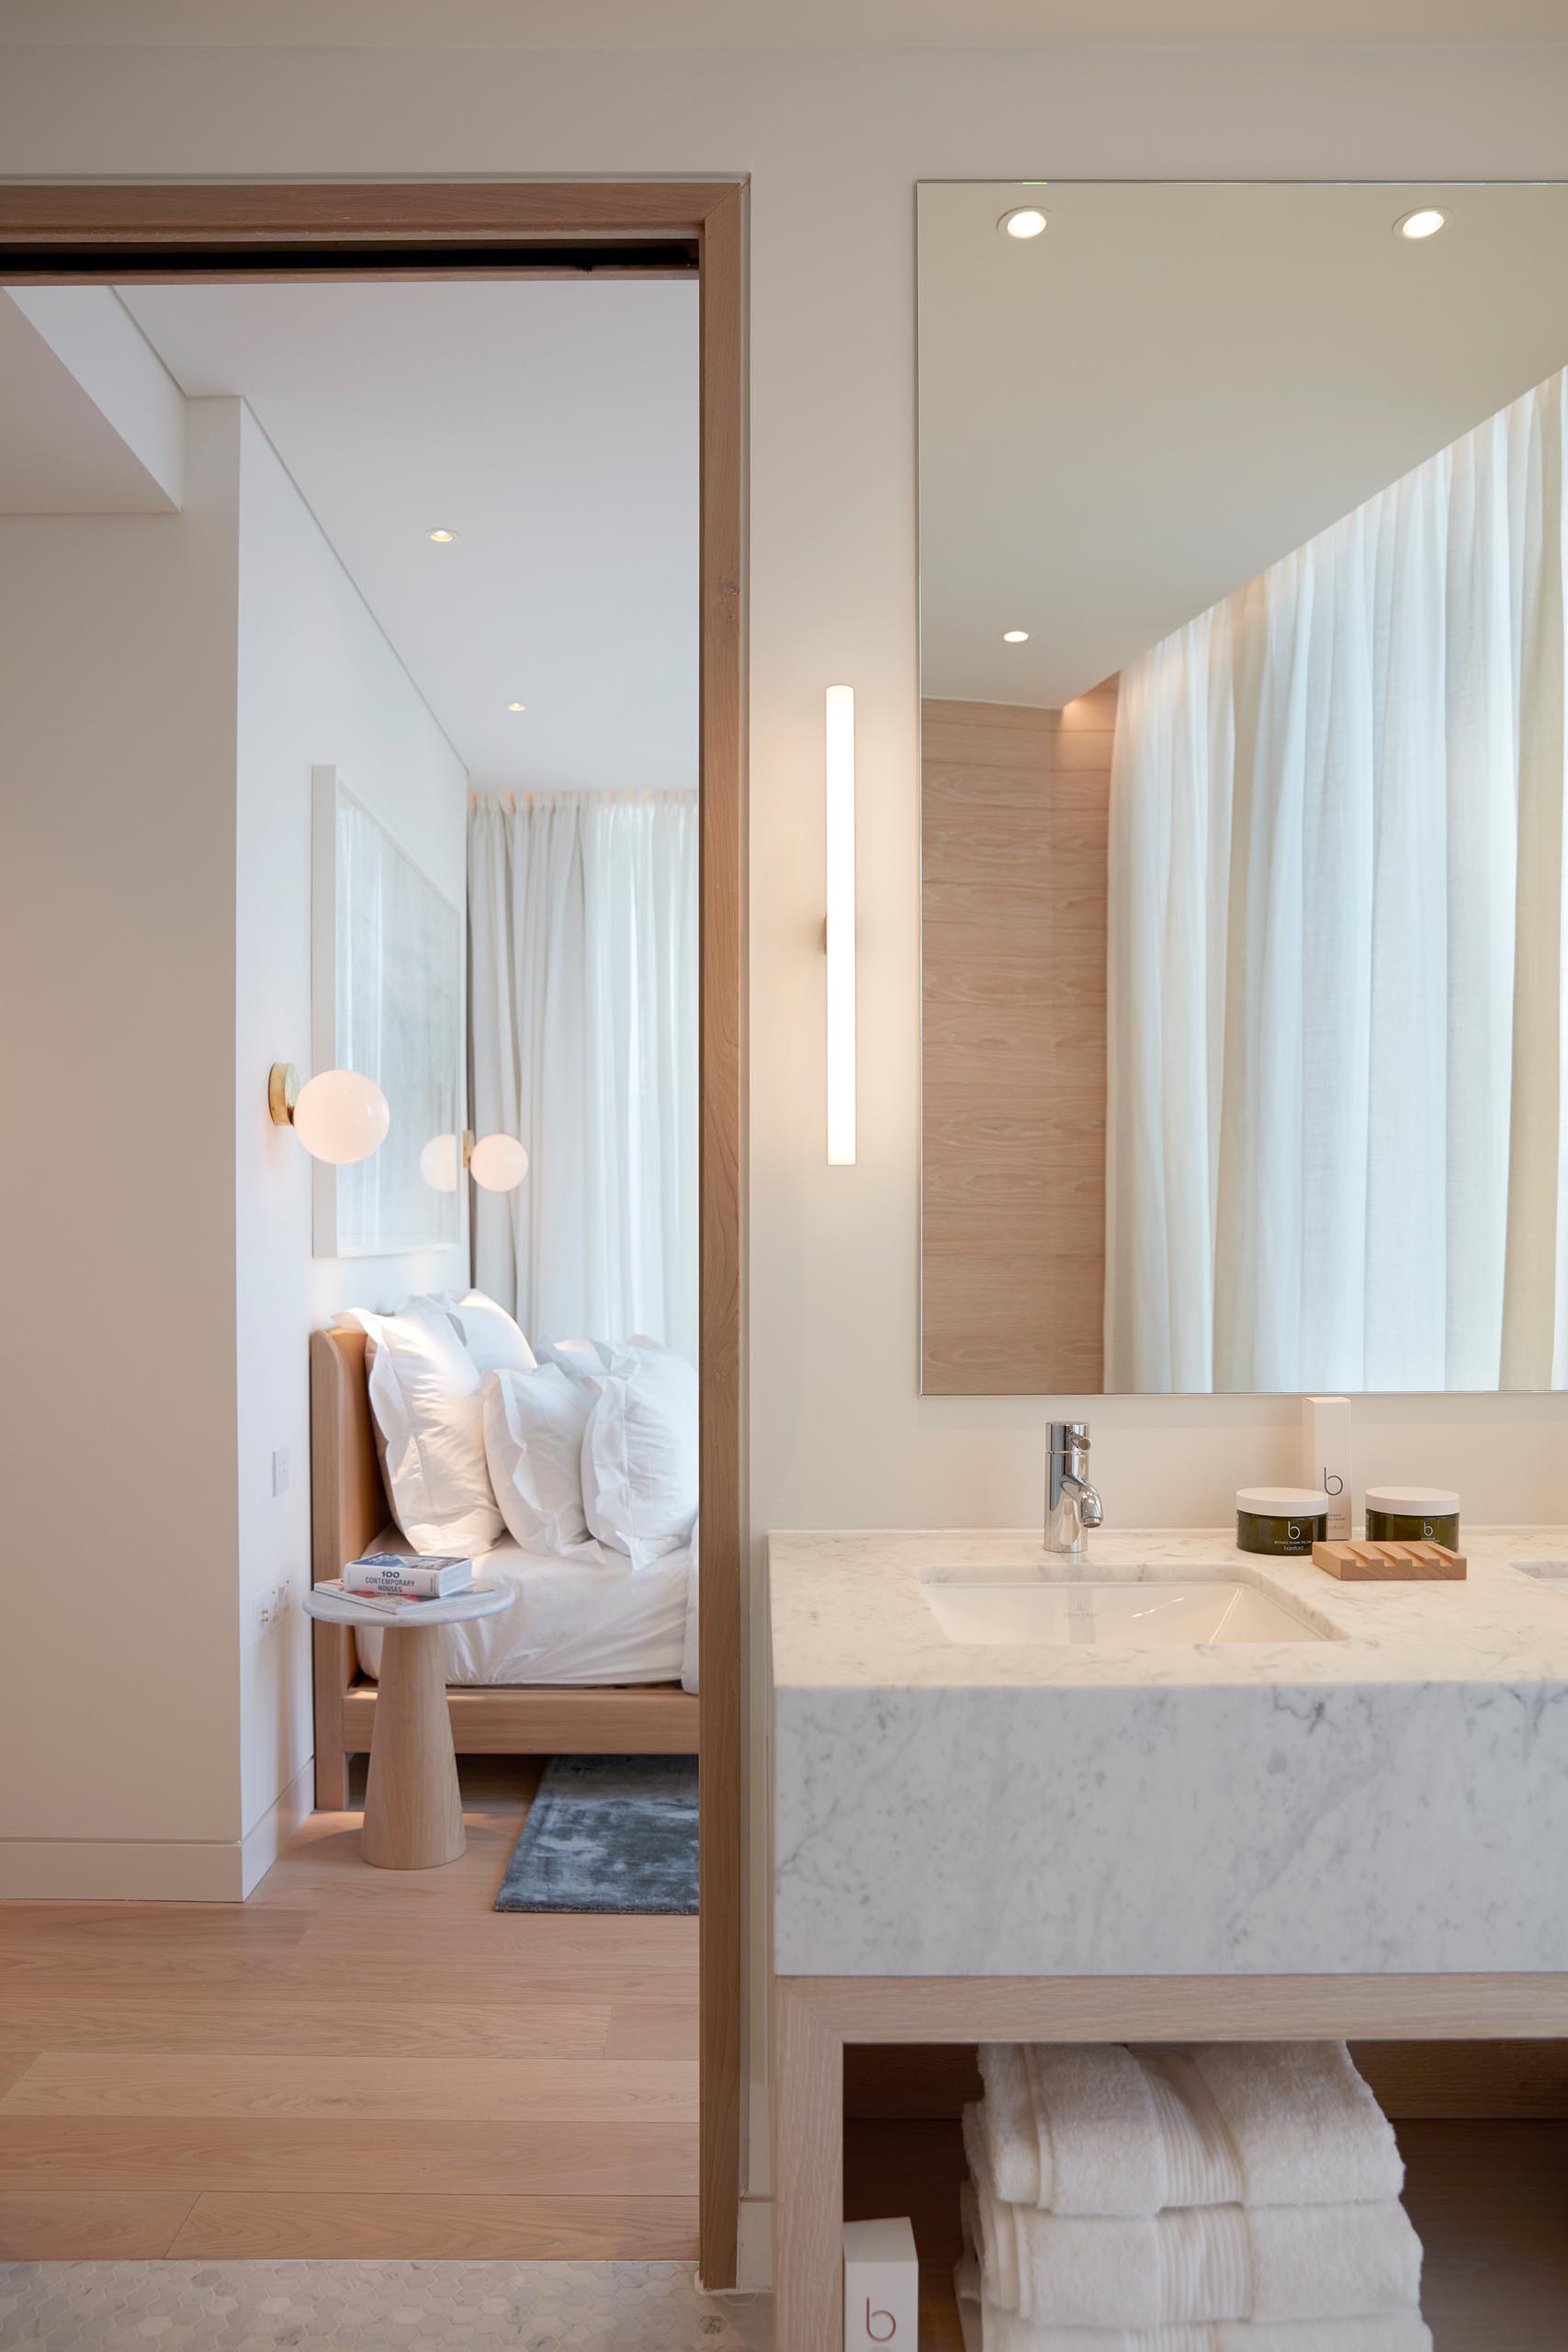 In an modern bathroom, light wood has been used for the open vanity shelving, as well as the accent wall that's installed behind the freestanding white bathtub, while the vanity countertop complements the walk-in shower.